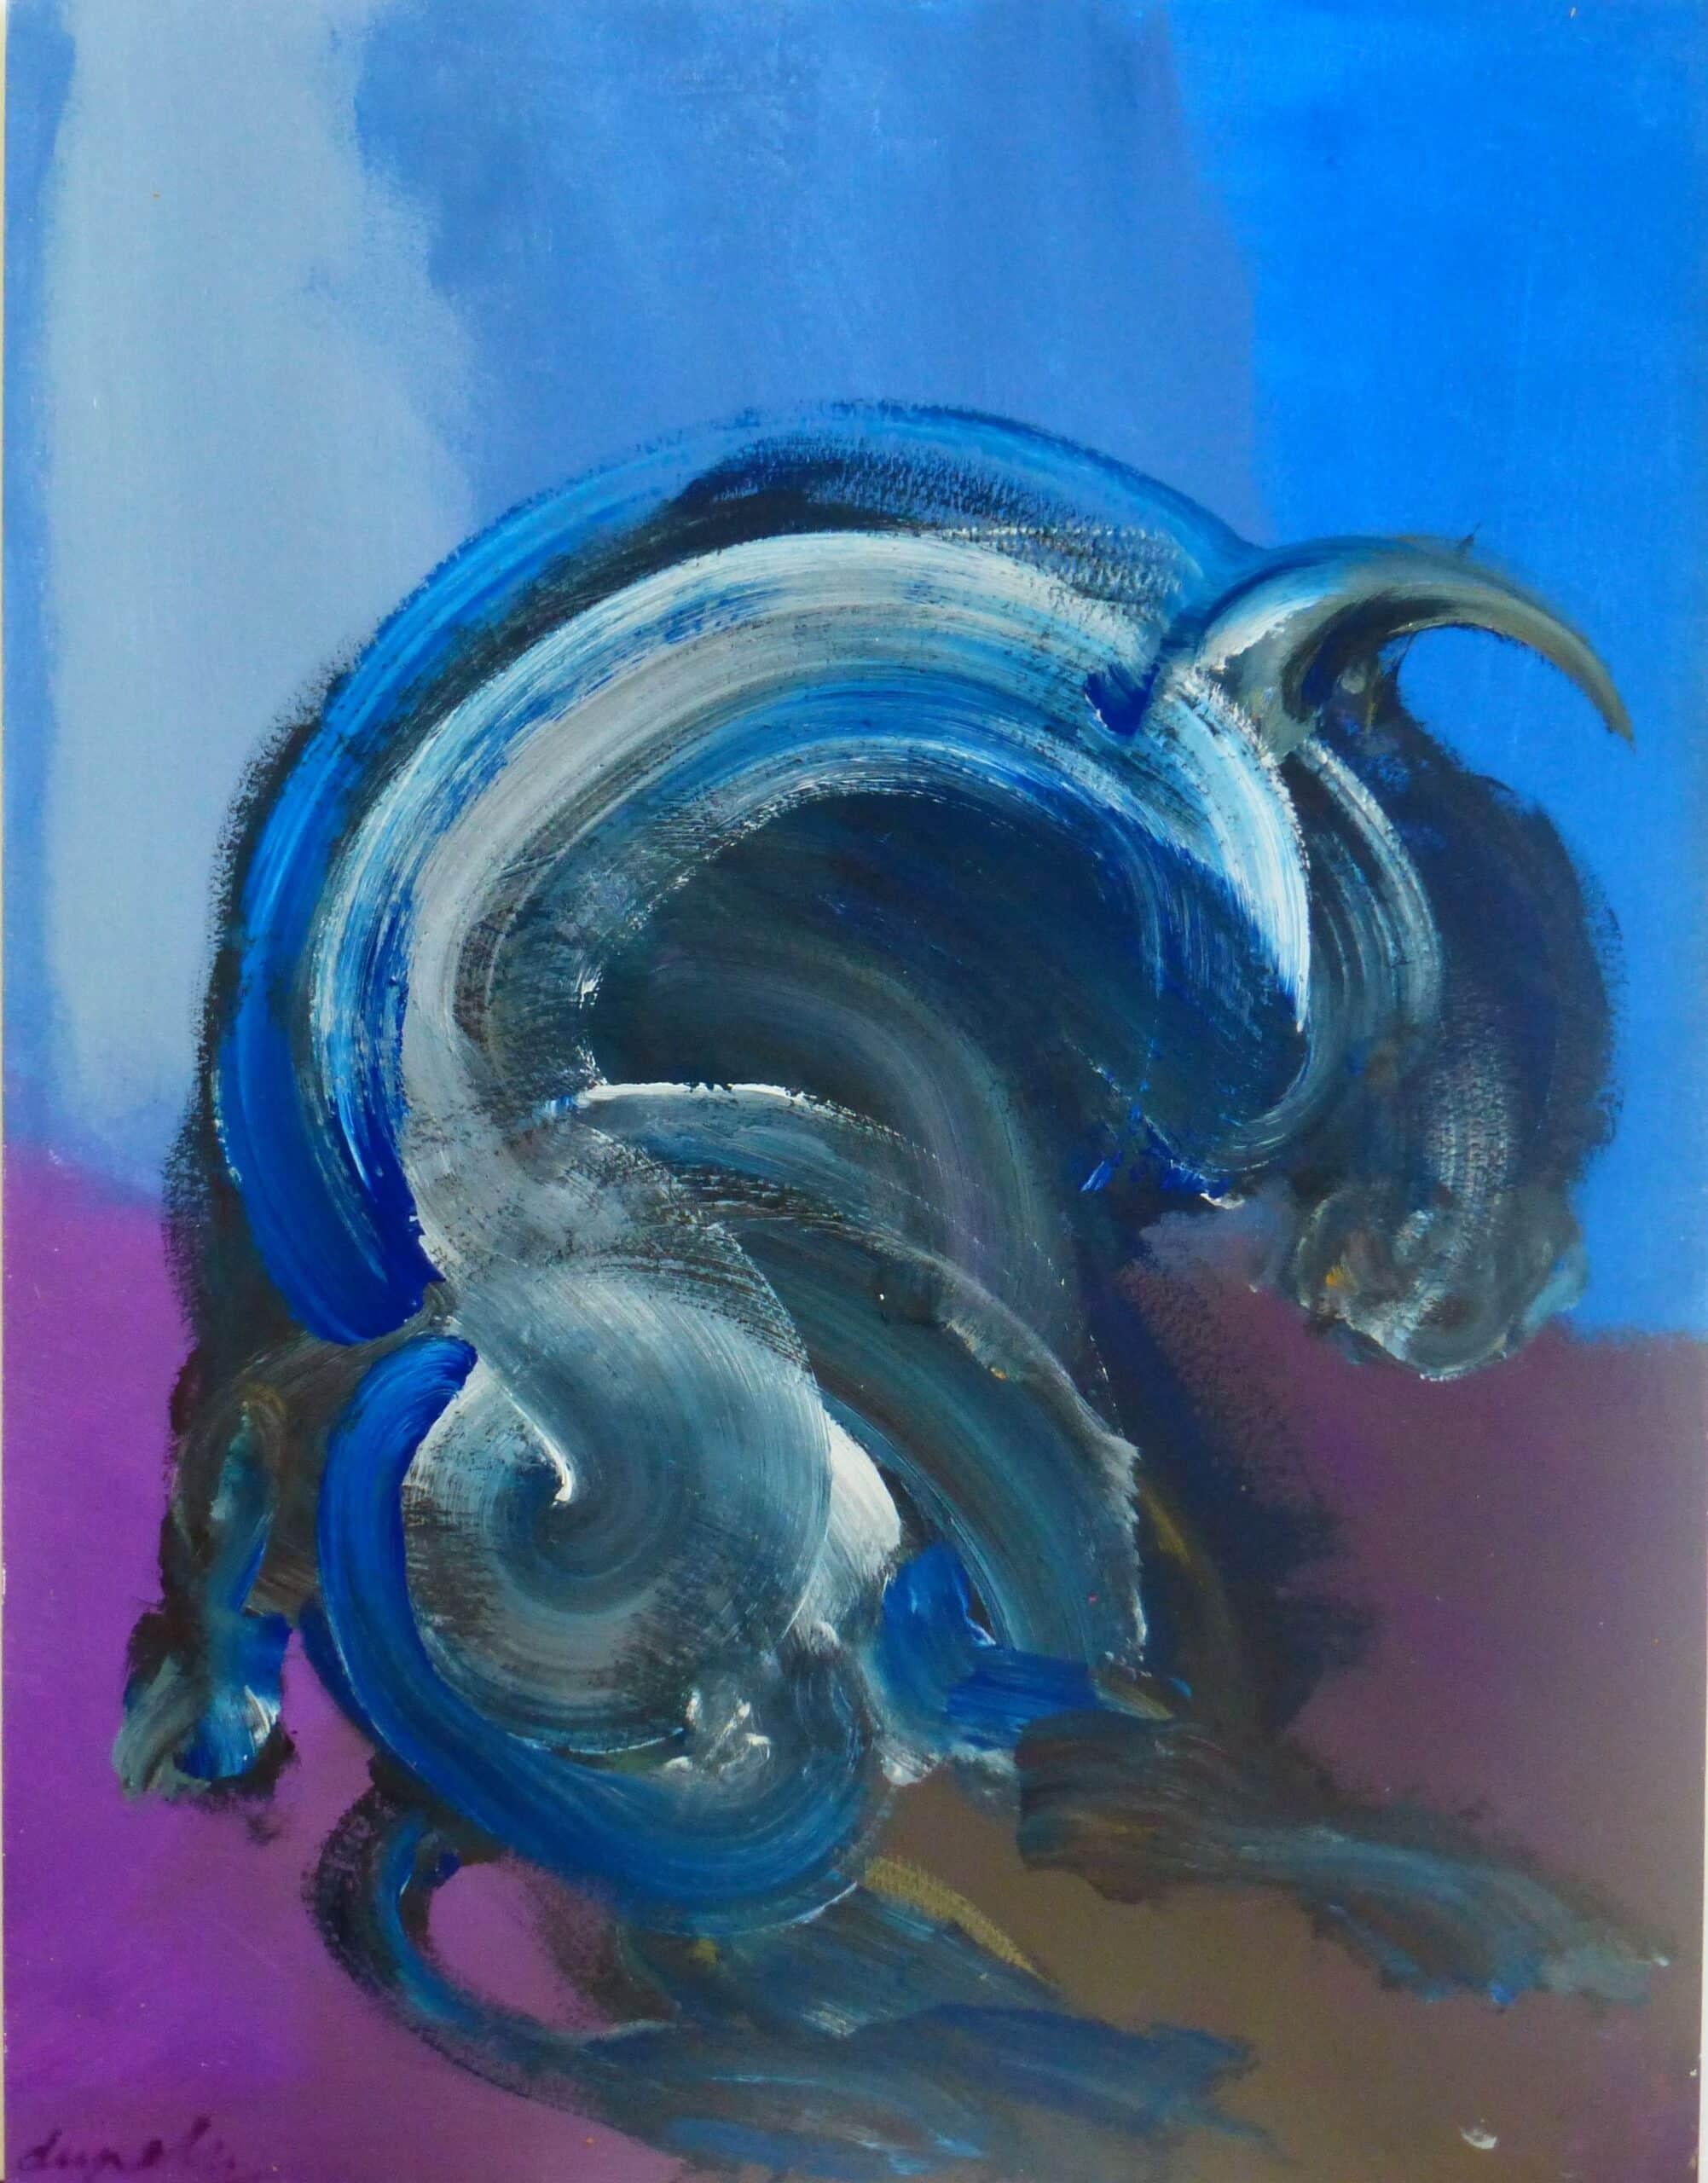 Bull VIII is a unique acrylic on paper painting by contemporary artist Christophe Dupety, dimensions are 65 × 50 cm (25.6 × 19.7 in).
The artwork is signed, sold unframed and comes with a certificate of authenticity.

The artist's endeavour is "to